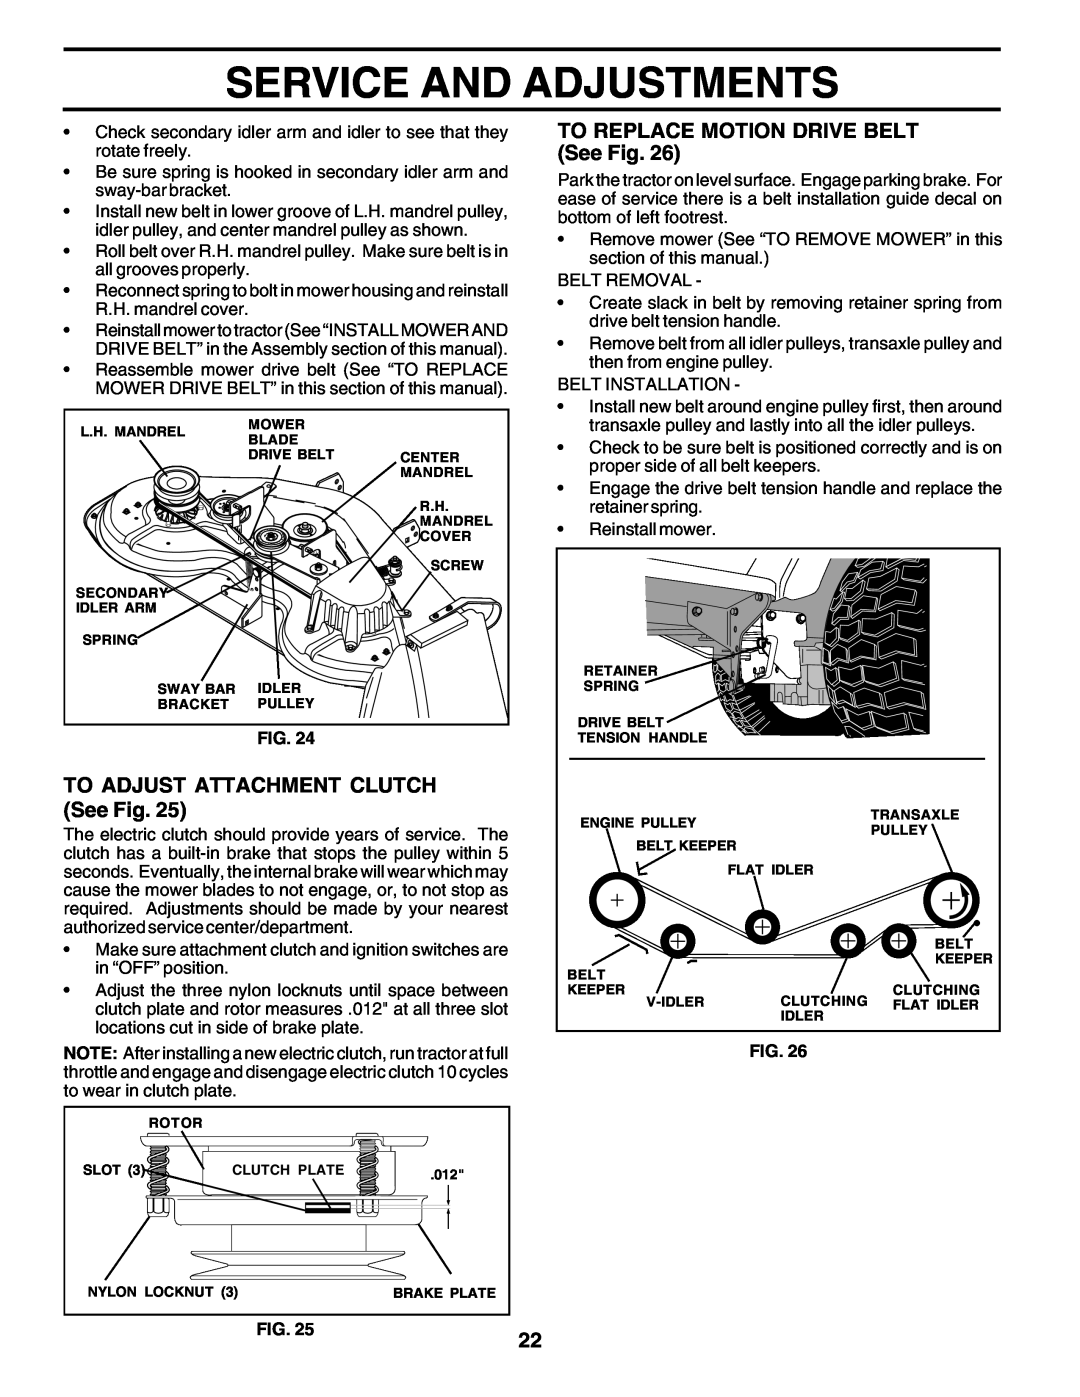 Poulan 178497 Service And Adjustments, TO ADJUST ATTACHMENT CLUTCH See Fig, TO REPLACE MOTION DRIVE BELT See Fig 